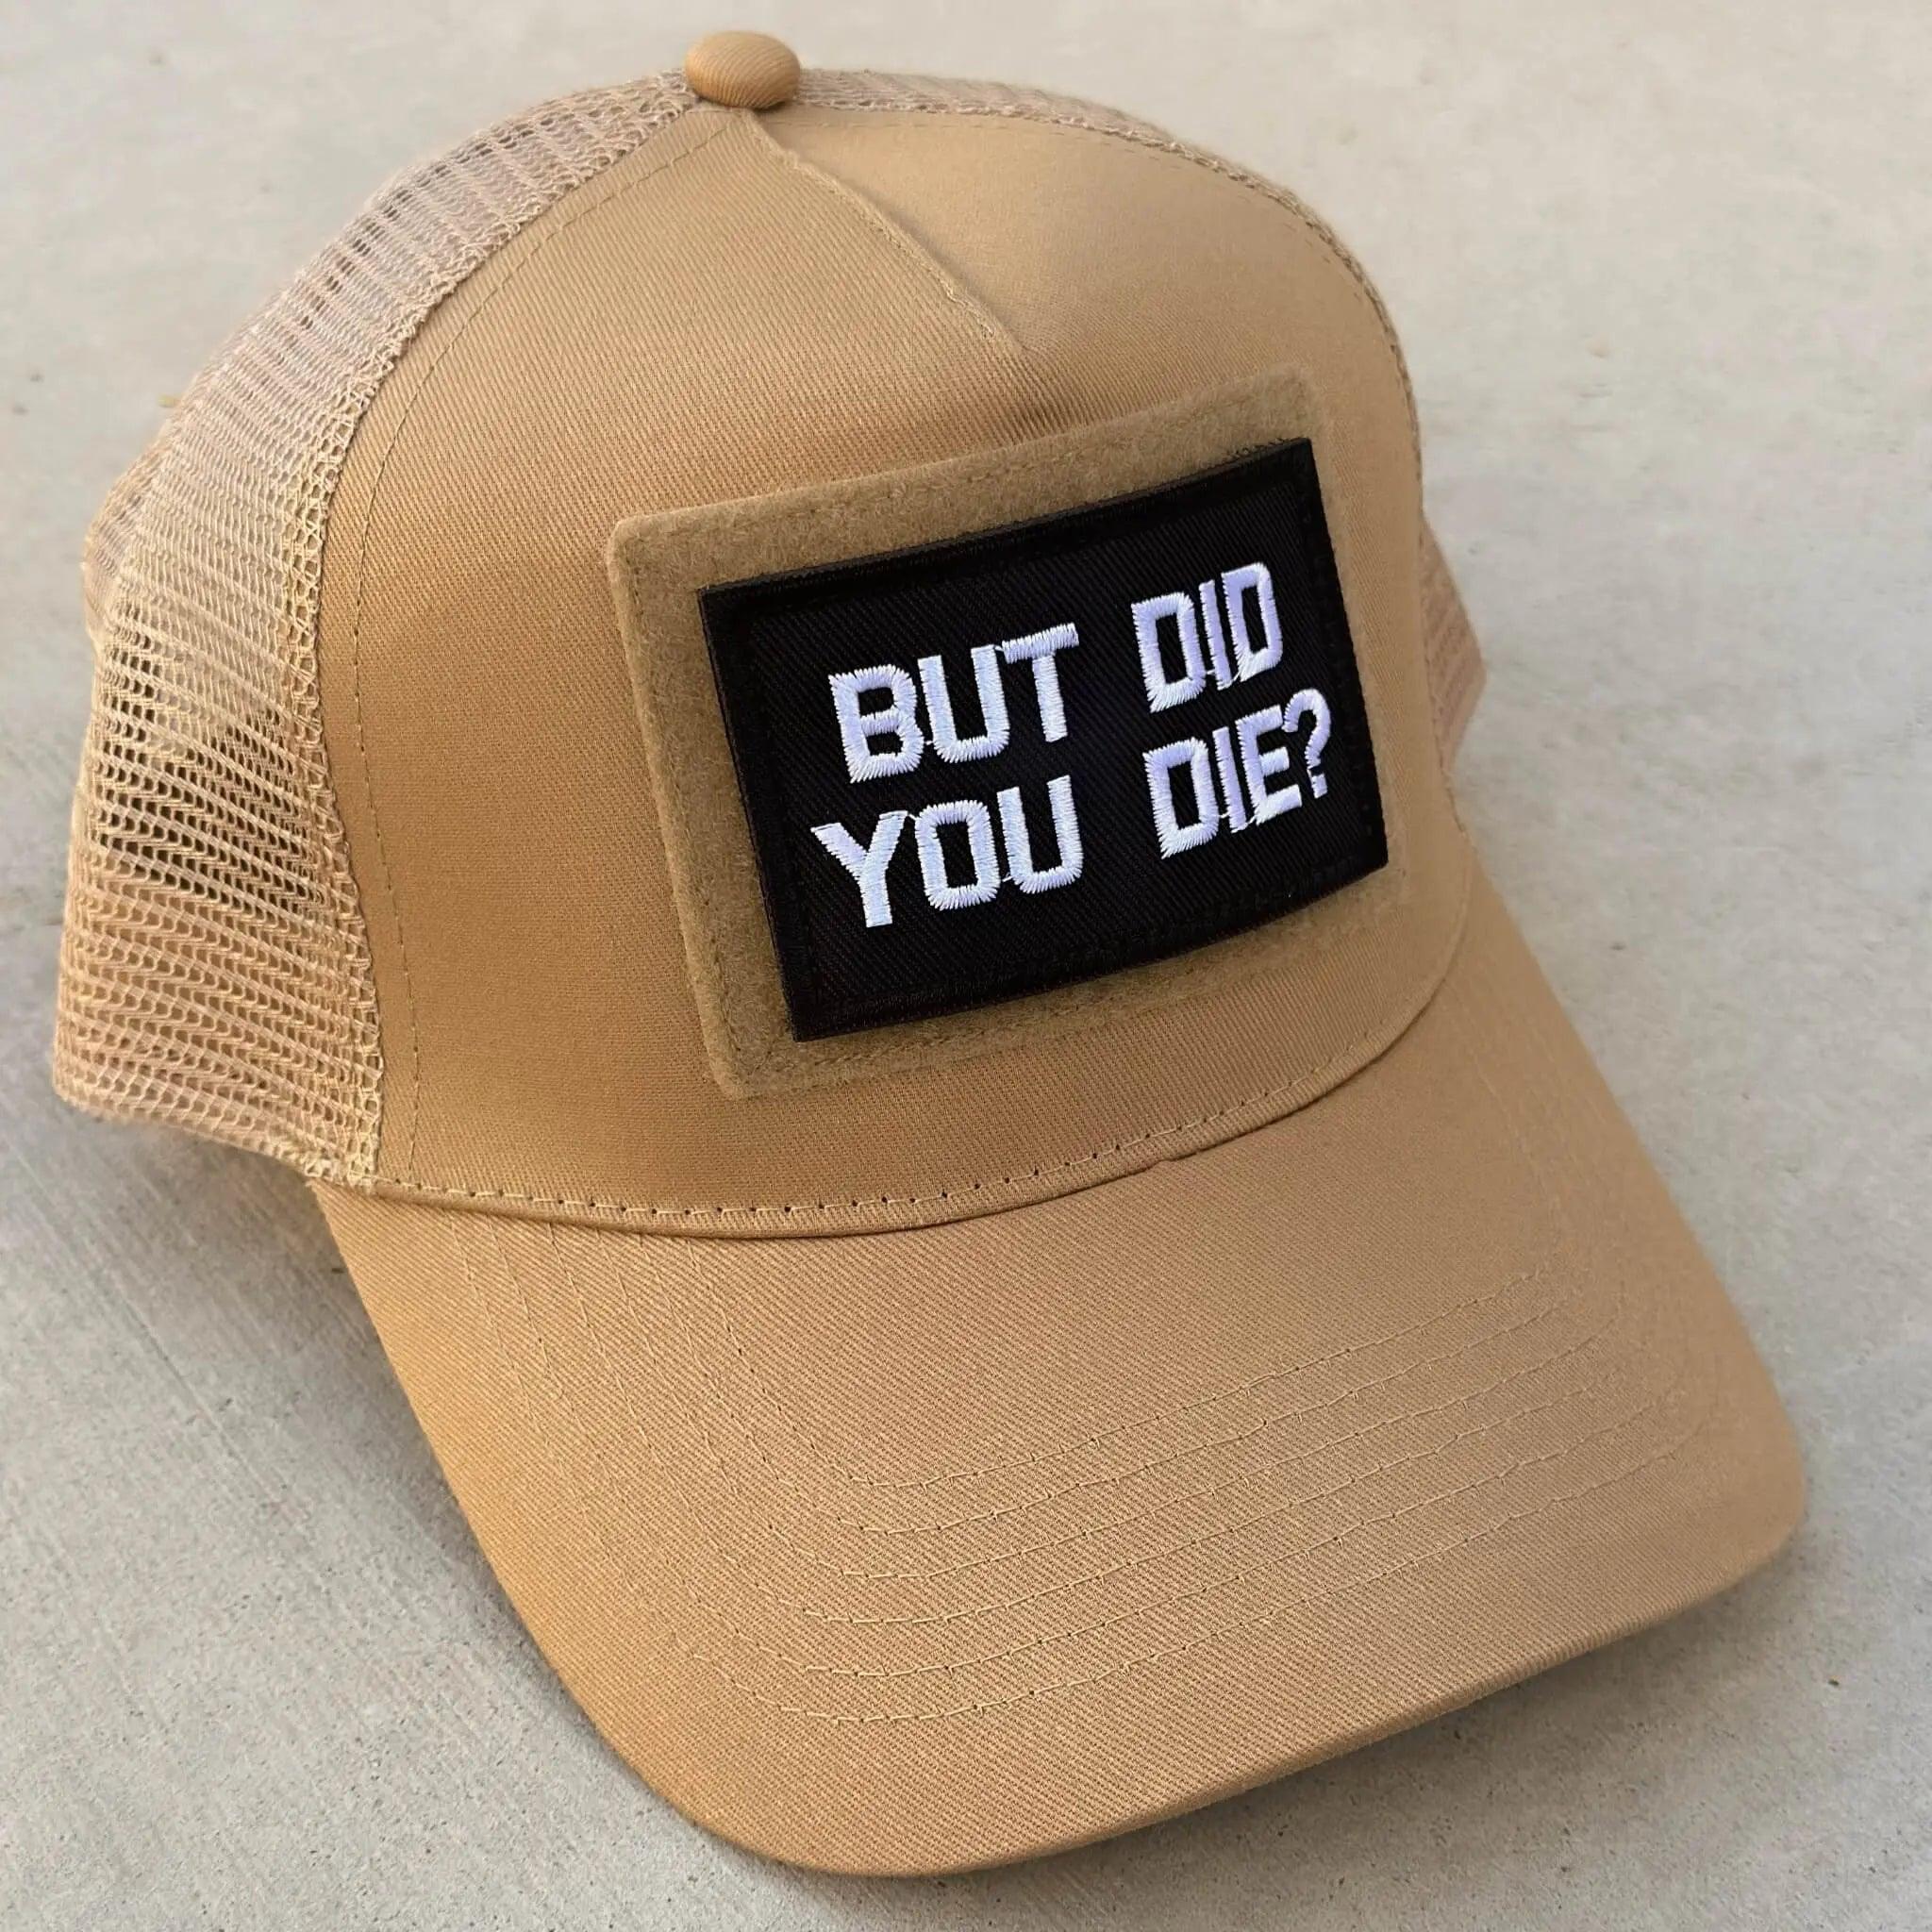 The trucker snapback cap in desert sand color with But Did You Die patch attached